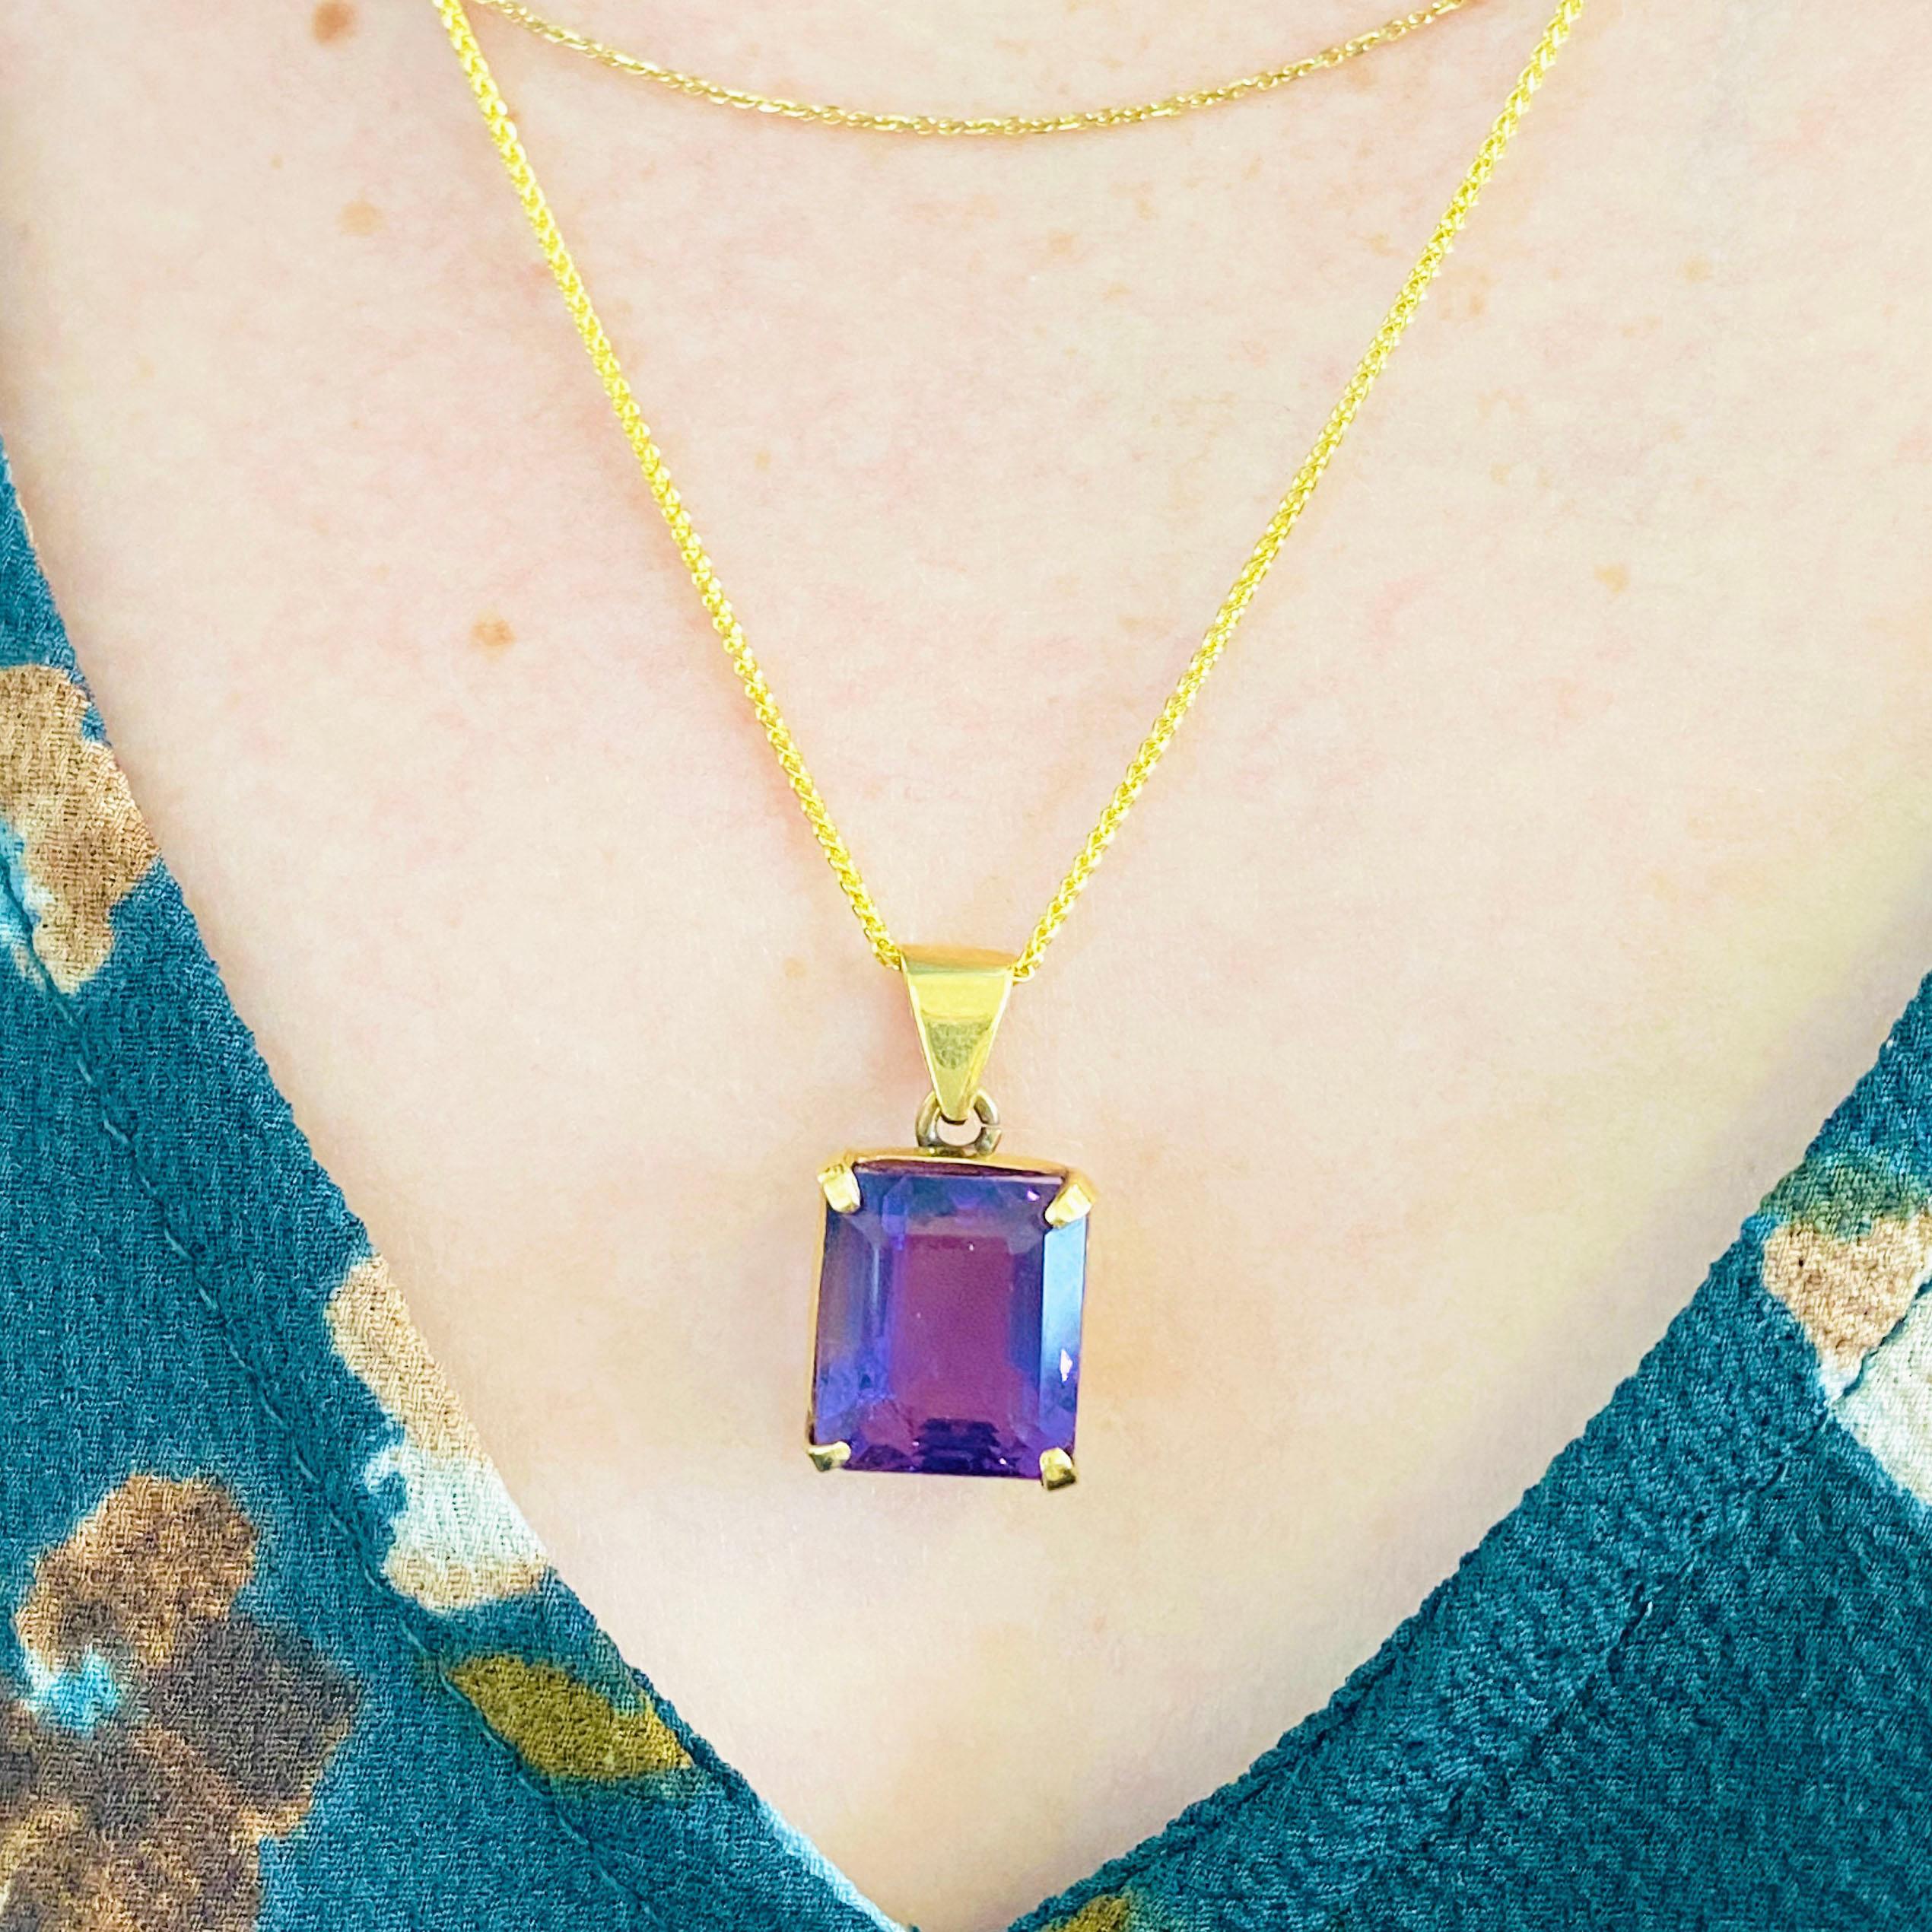 This beautiful vibrant emerald cut amethyst set in polished 18k yellow gold provides a look that is very modern yet classic! You won't believe how stunning this stone is. This necklace is very fashionable and can add a touch of style to any outfit,